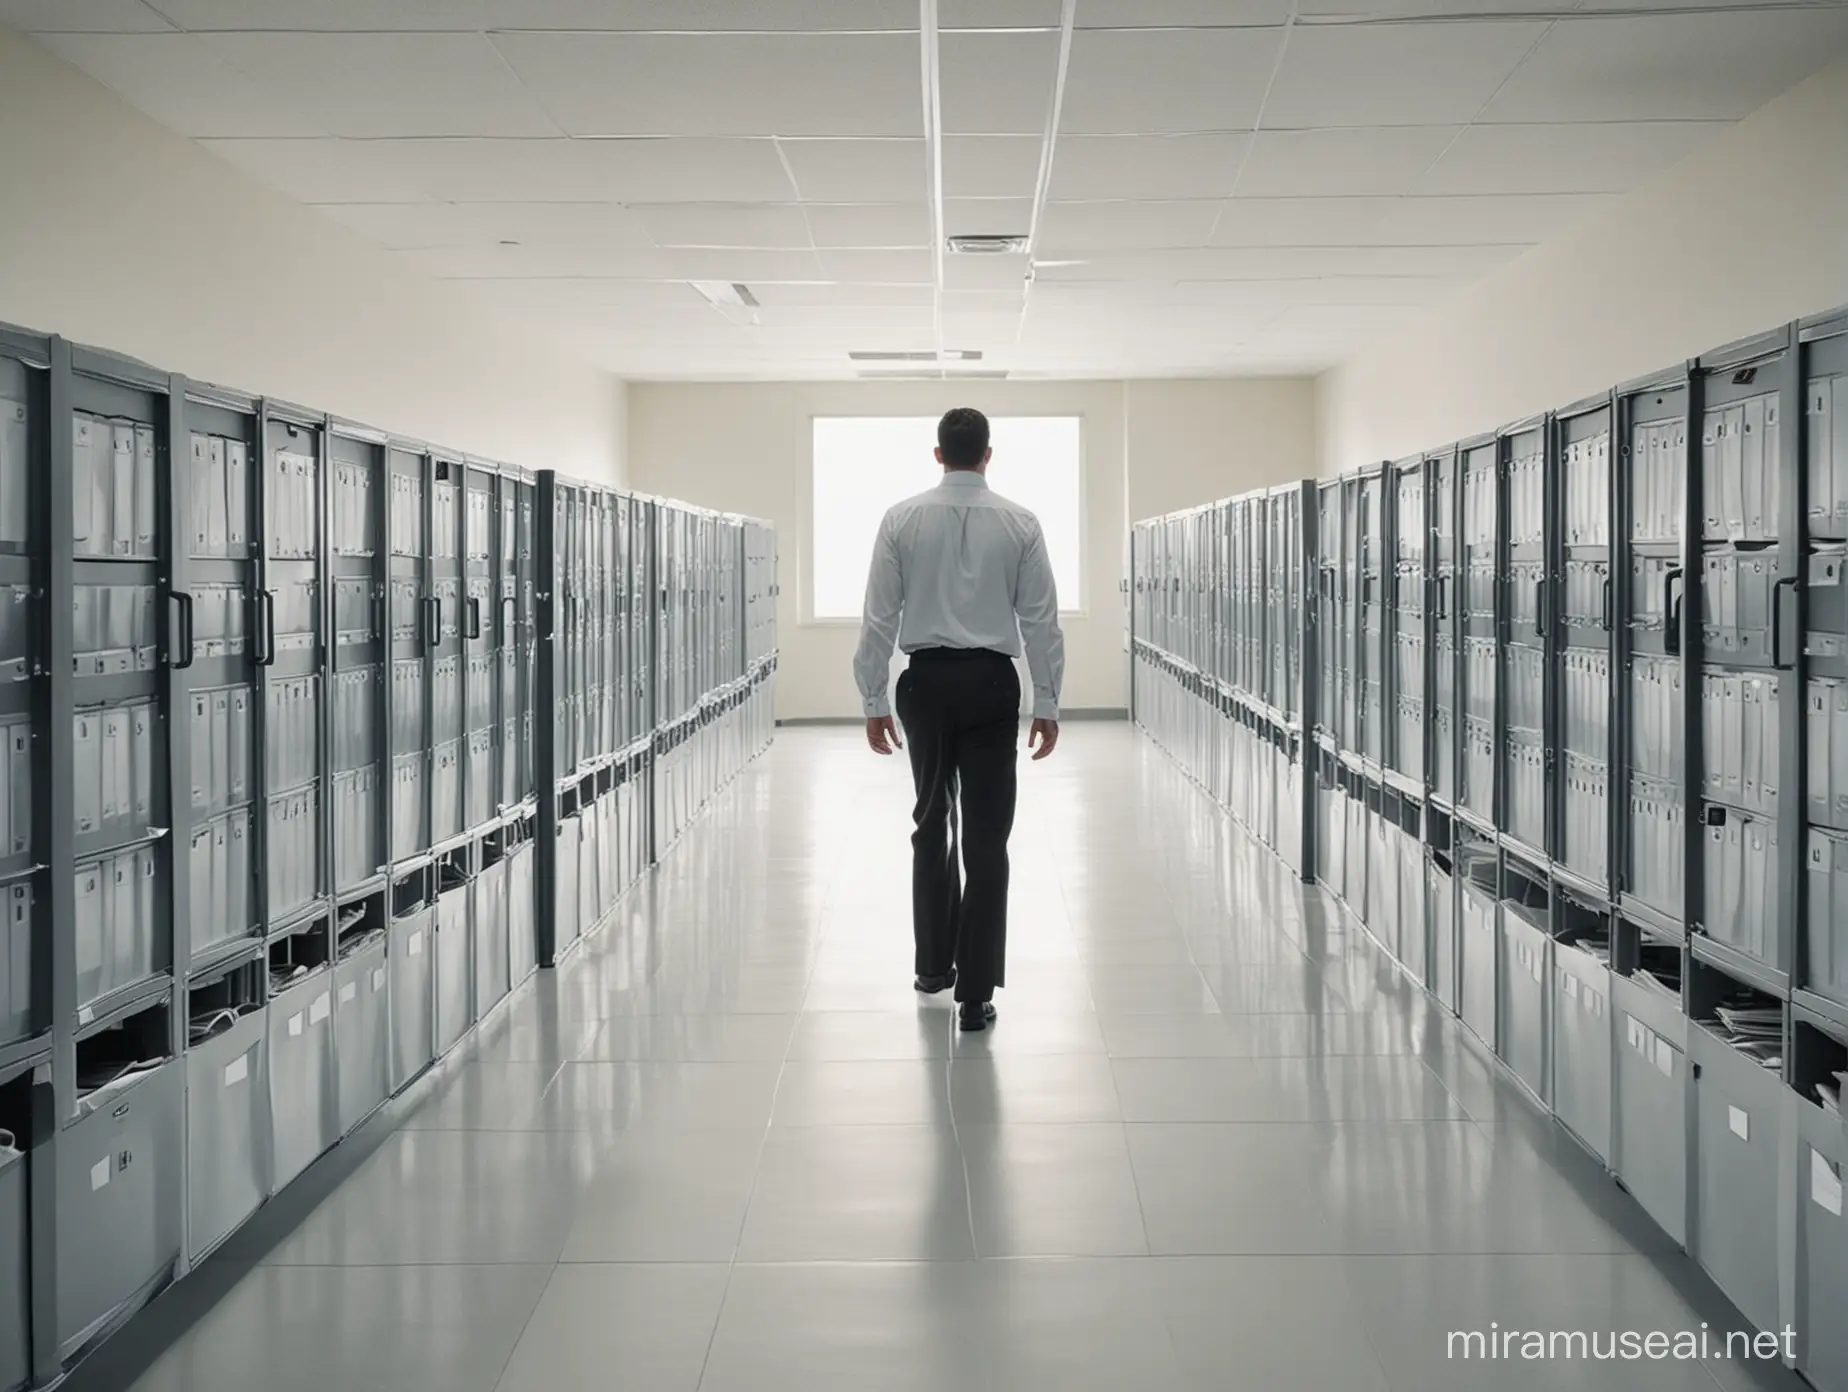 Office Worker Navigating Pristine Data Center with Advanced Computers and Databases